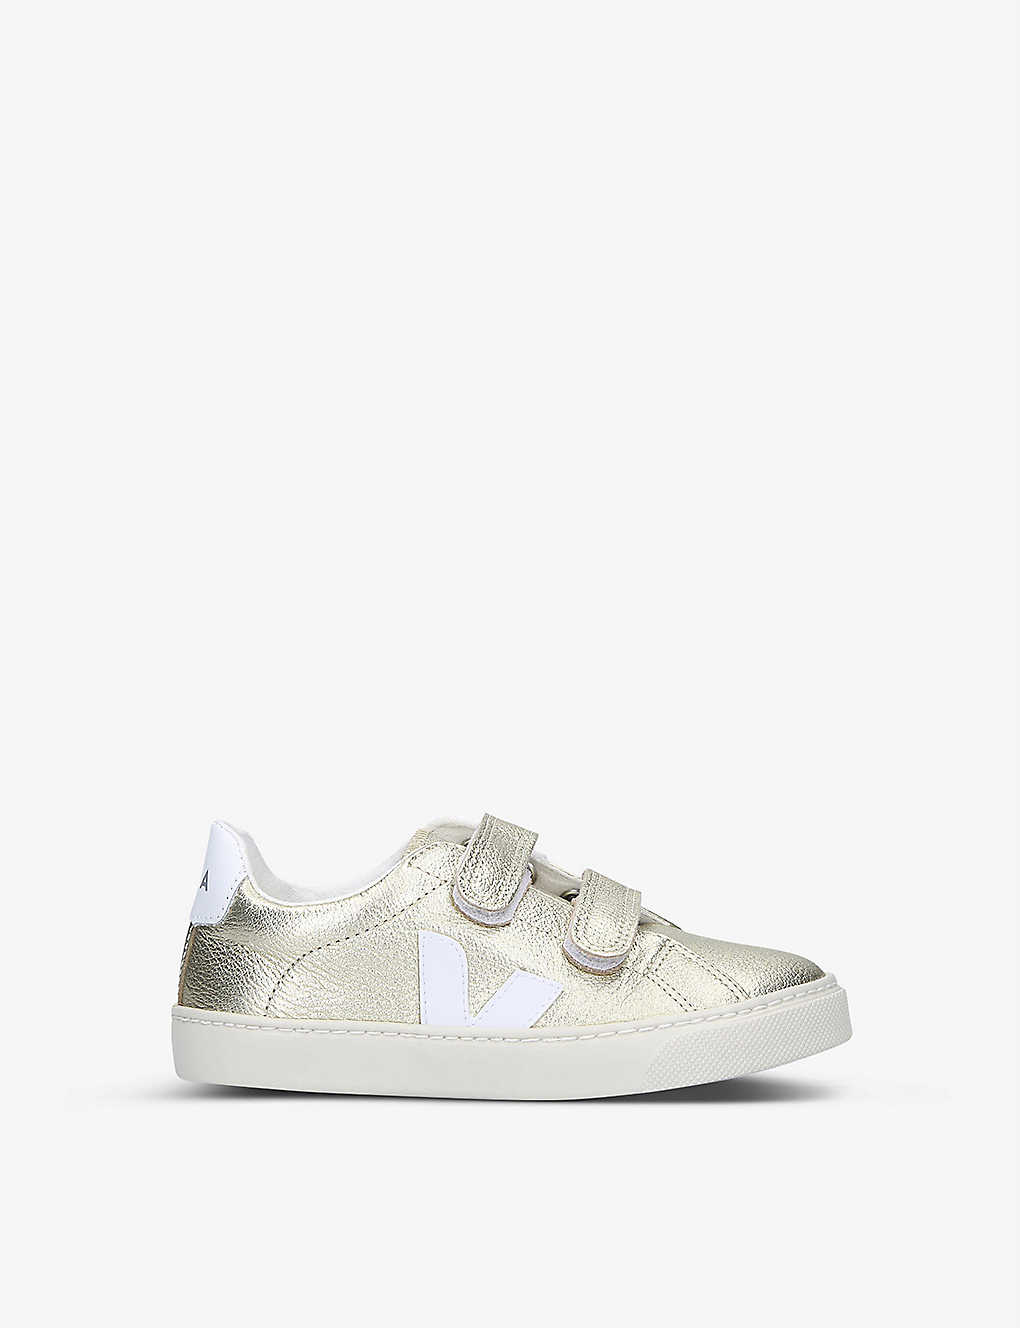 Veja Esplar Leather Trainers 6-9 Years In Gold